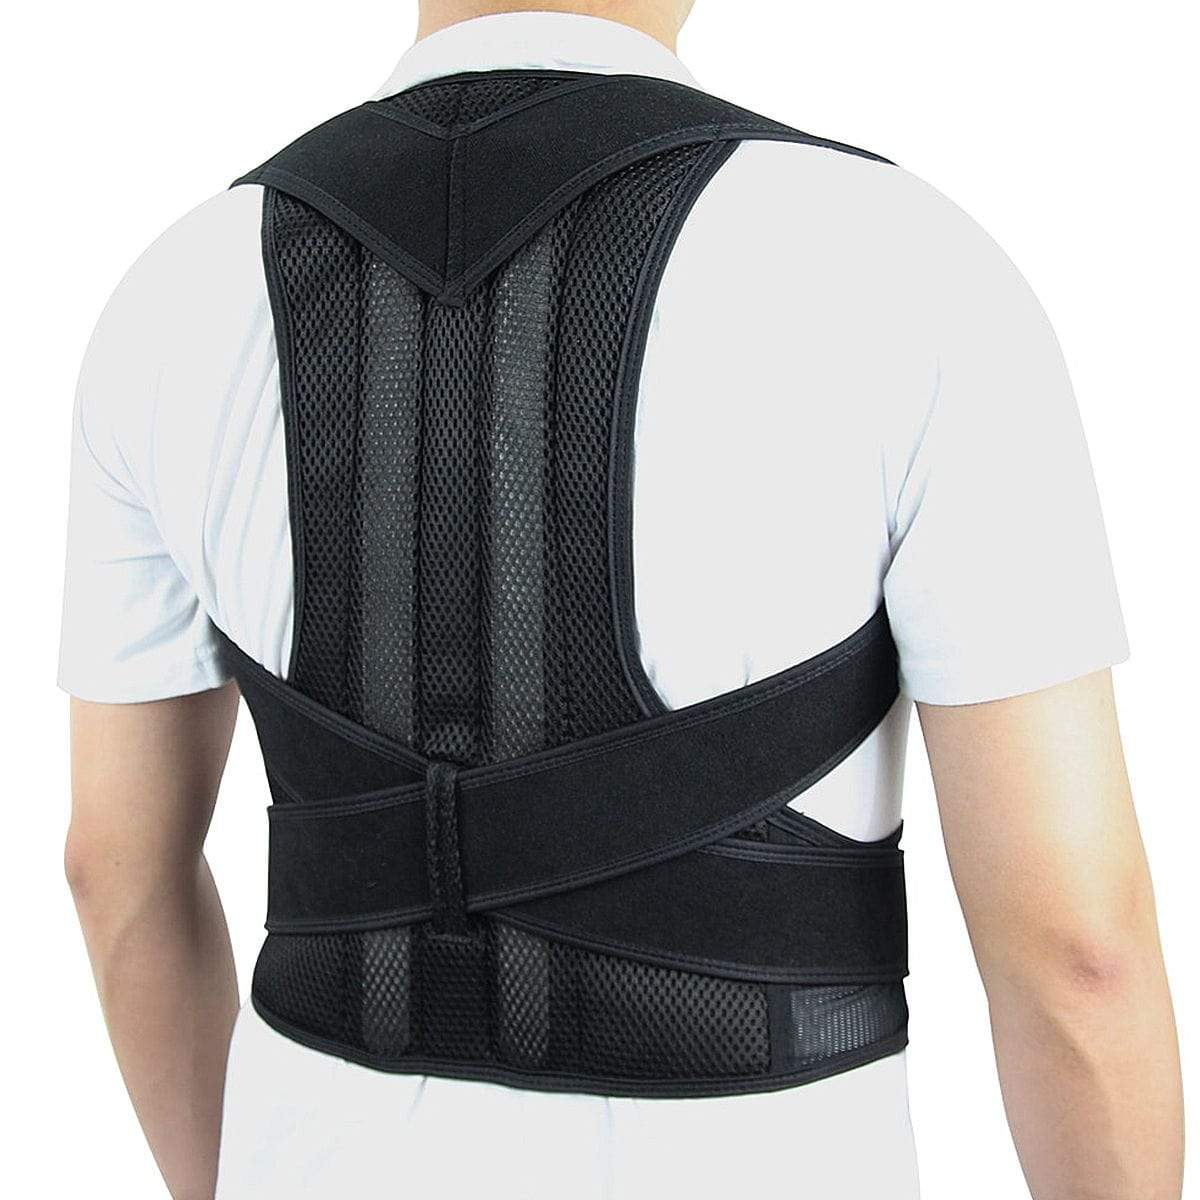 Scoliosis Back Brace by Posture Universe